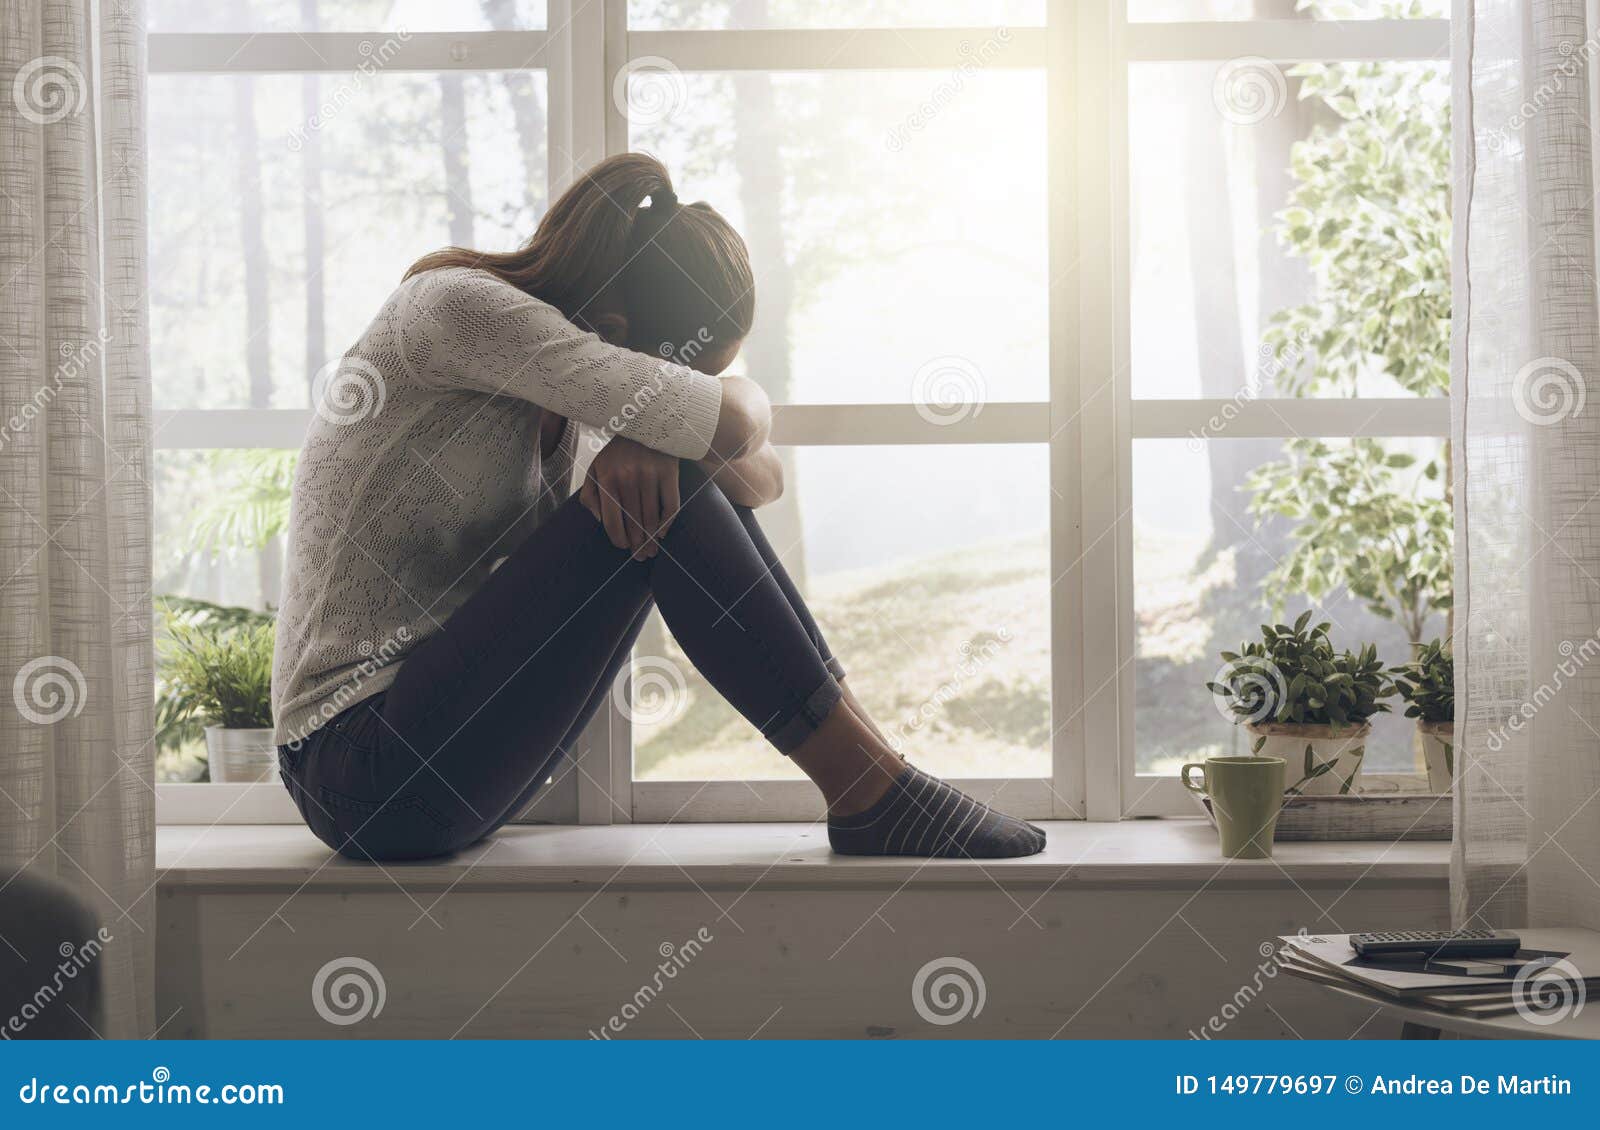 Sad Lonely Woman Sitting at Home Alone Stock Image - Image of ...